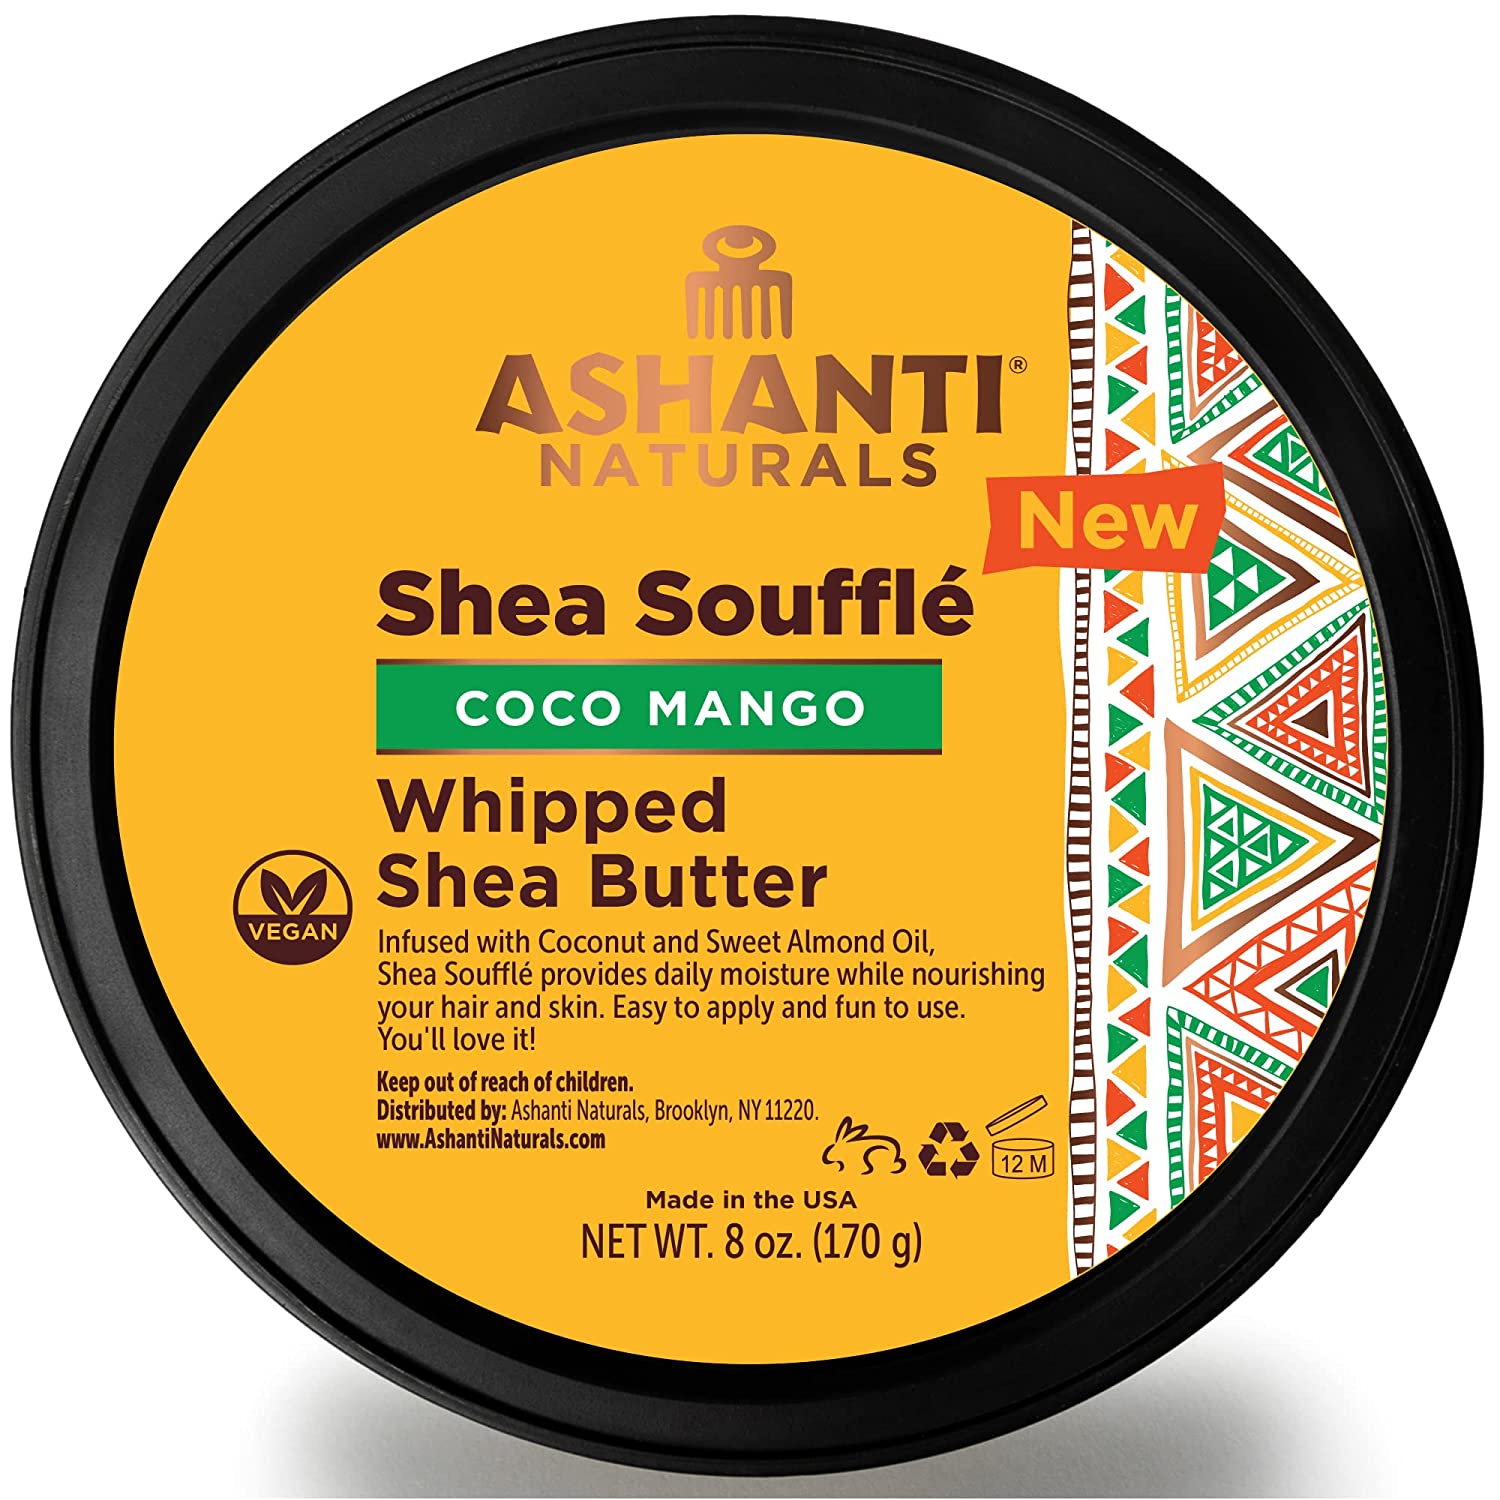 Ashanti Naturals Scented Whipped Shea Butter | Unrefined Shea Butter from Ghana, Coconut and Almond Oil (Coco Mango Souffle, 8 oz)